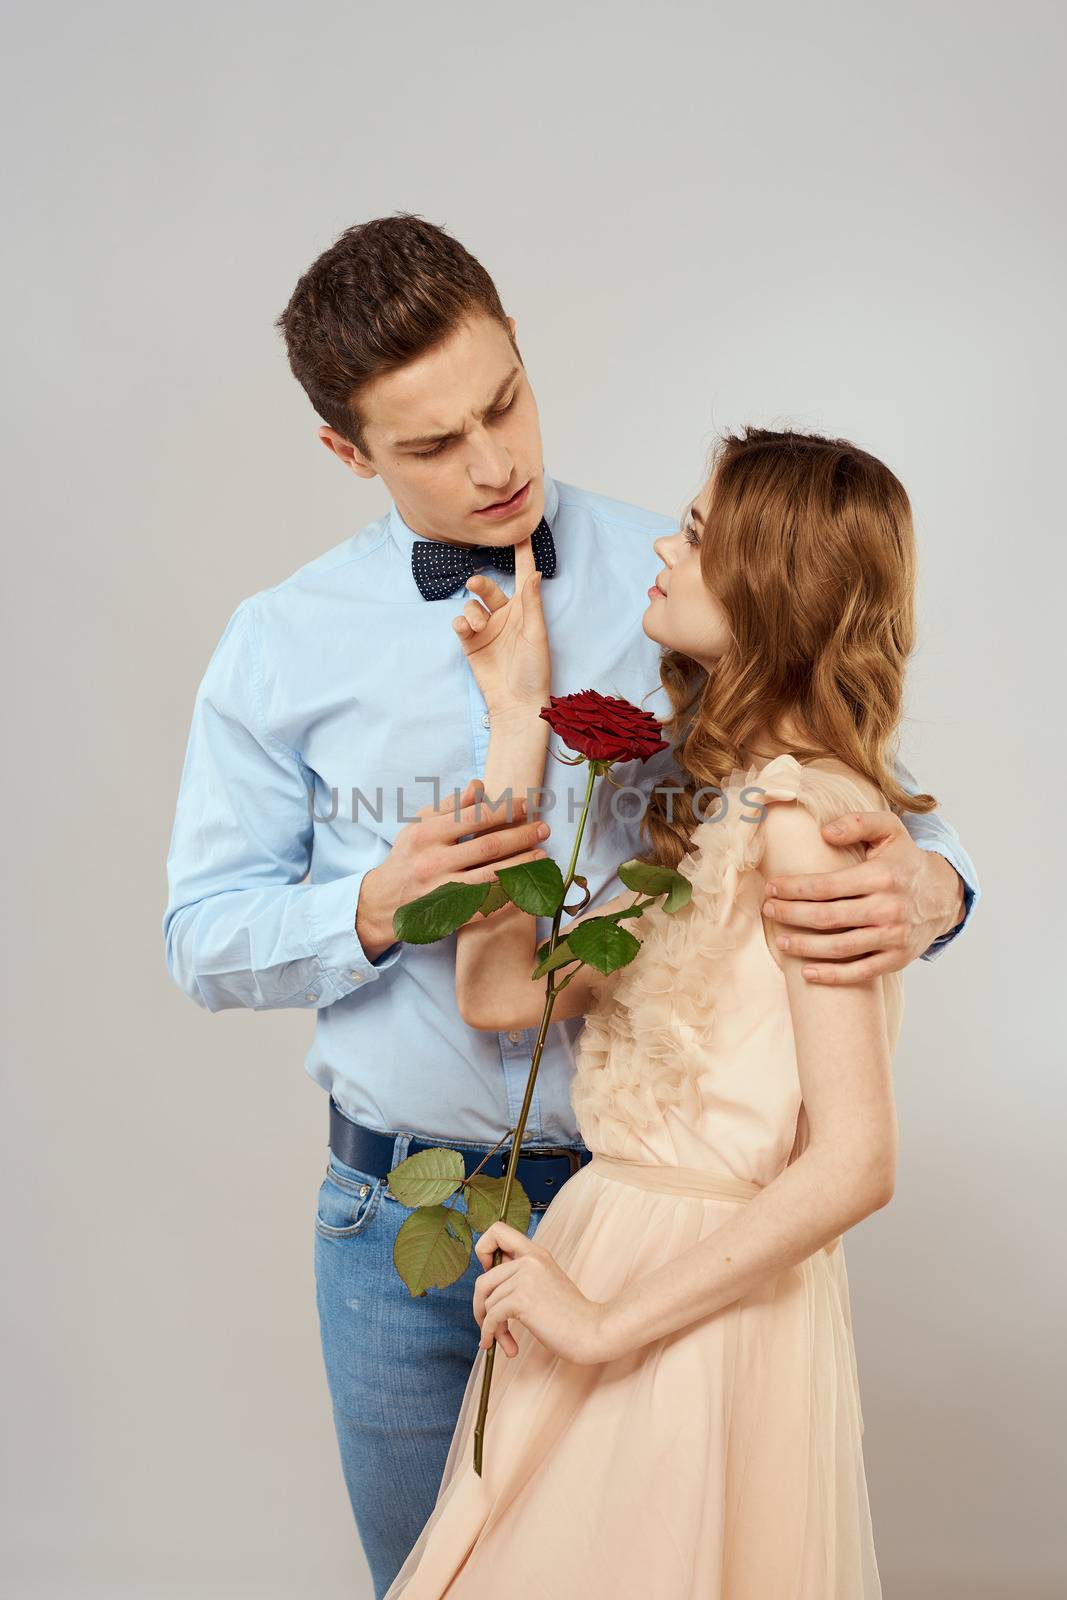 Young couple romance hug relationship dating red rose light studio background by SHOTPRIME